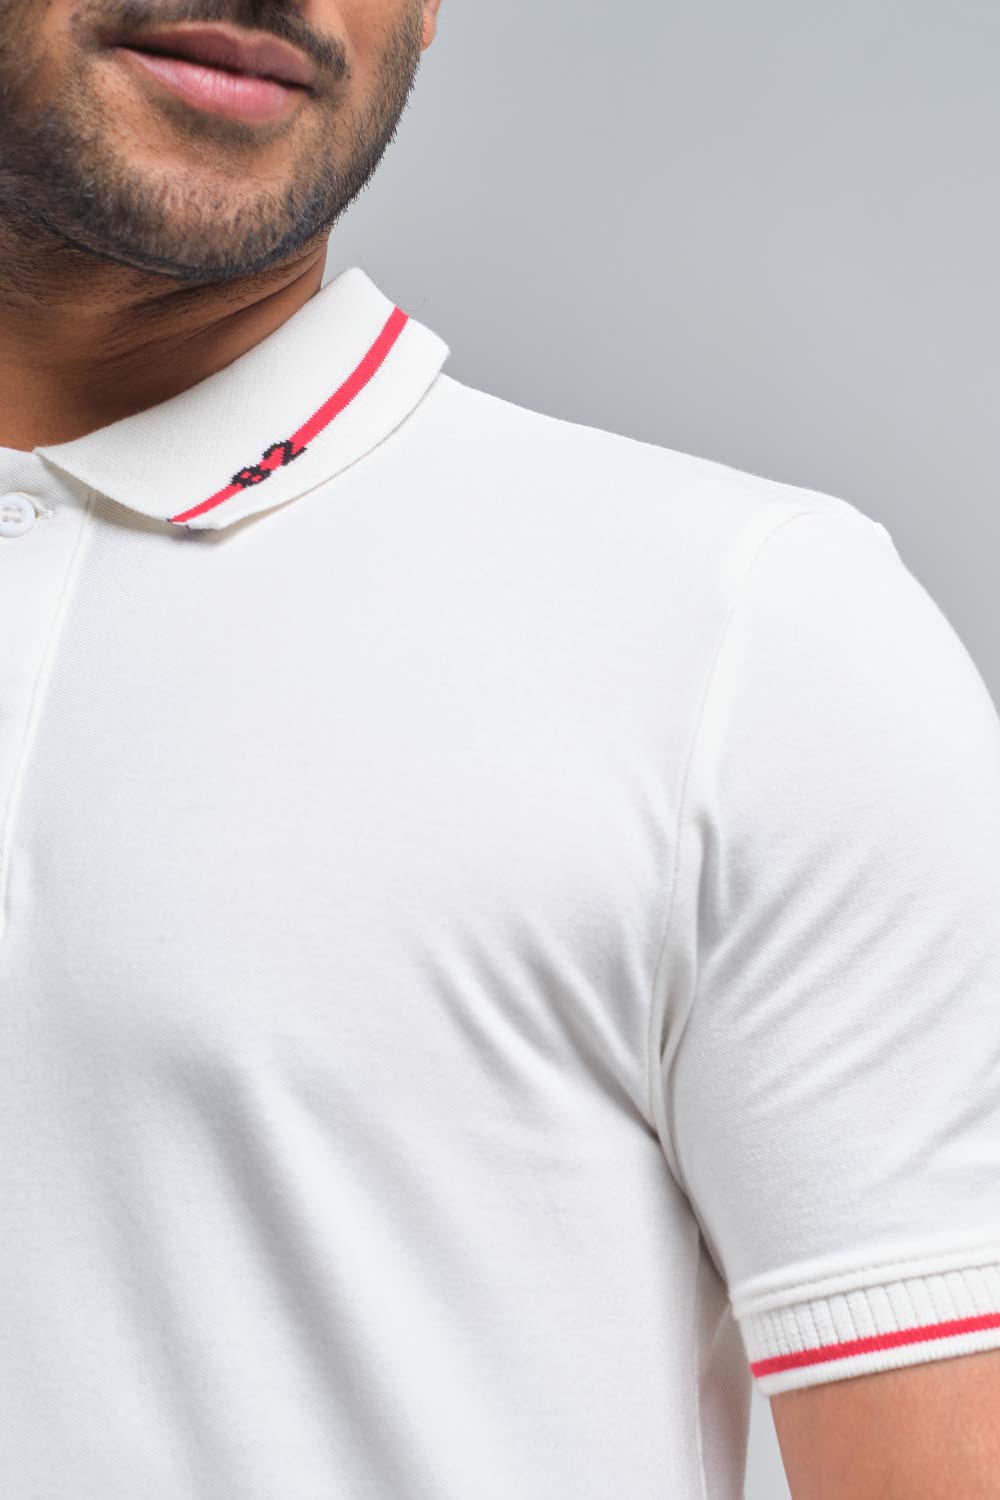 Plain premium cotton with 82 knitted collar, Slim fit polo T-shirt